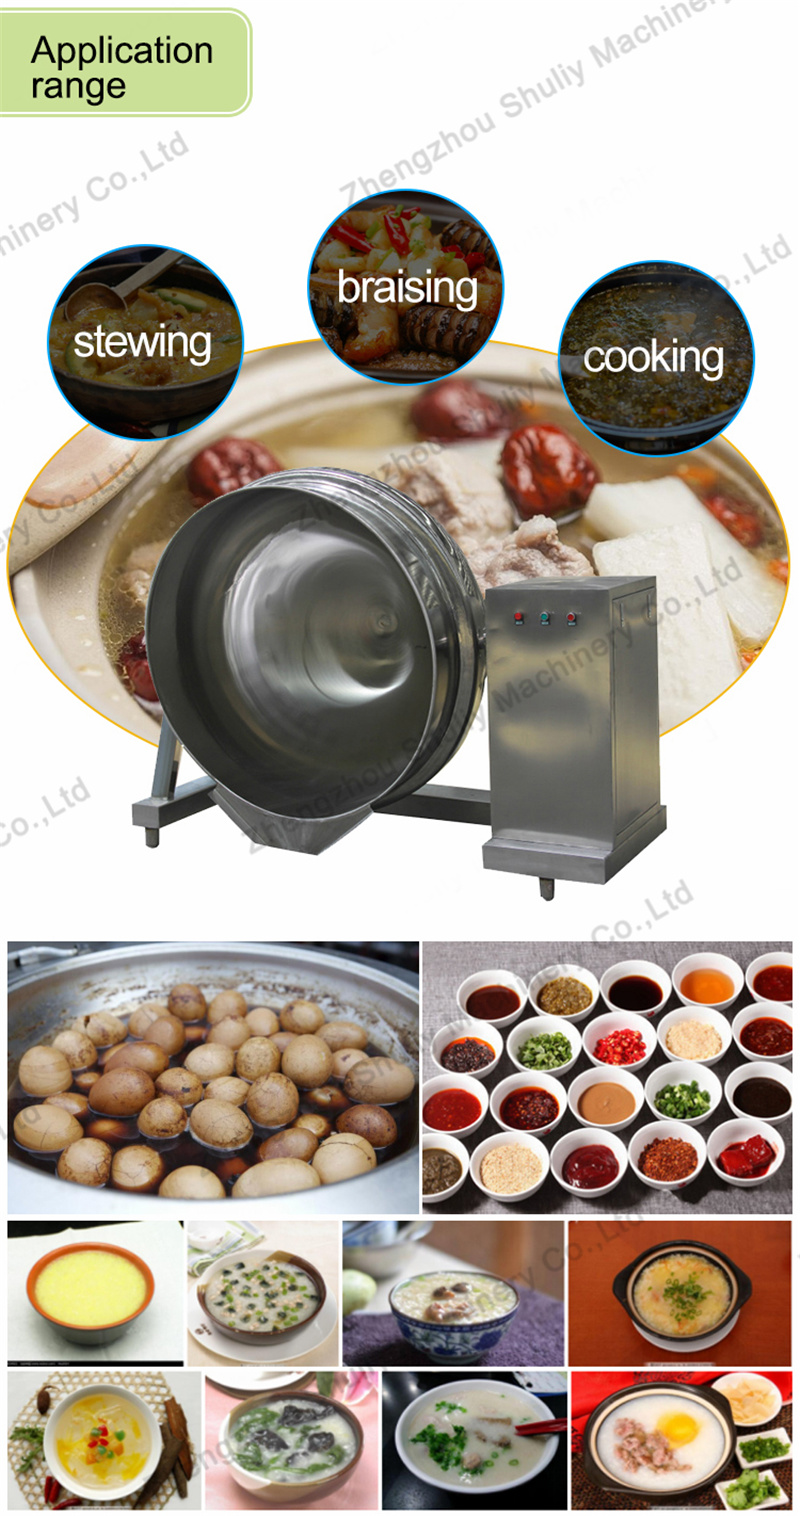 Stainless Steel Sandwich Pot Jacket Cooking Kettle Manufacturers